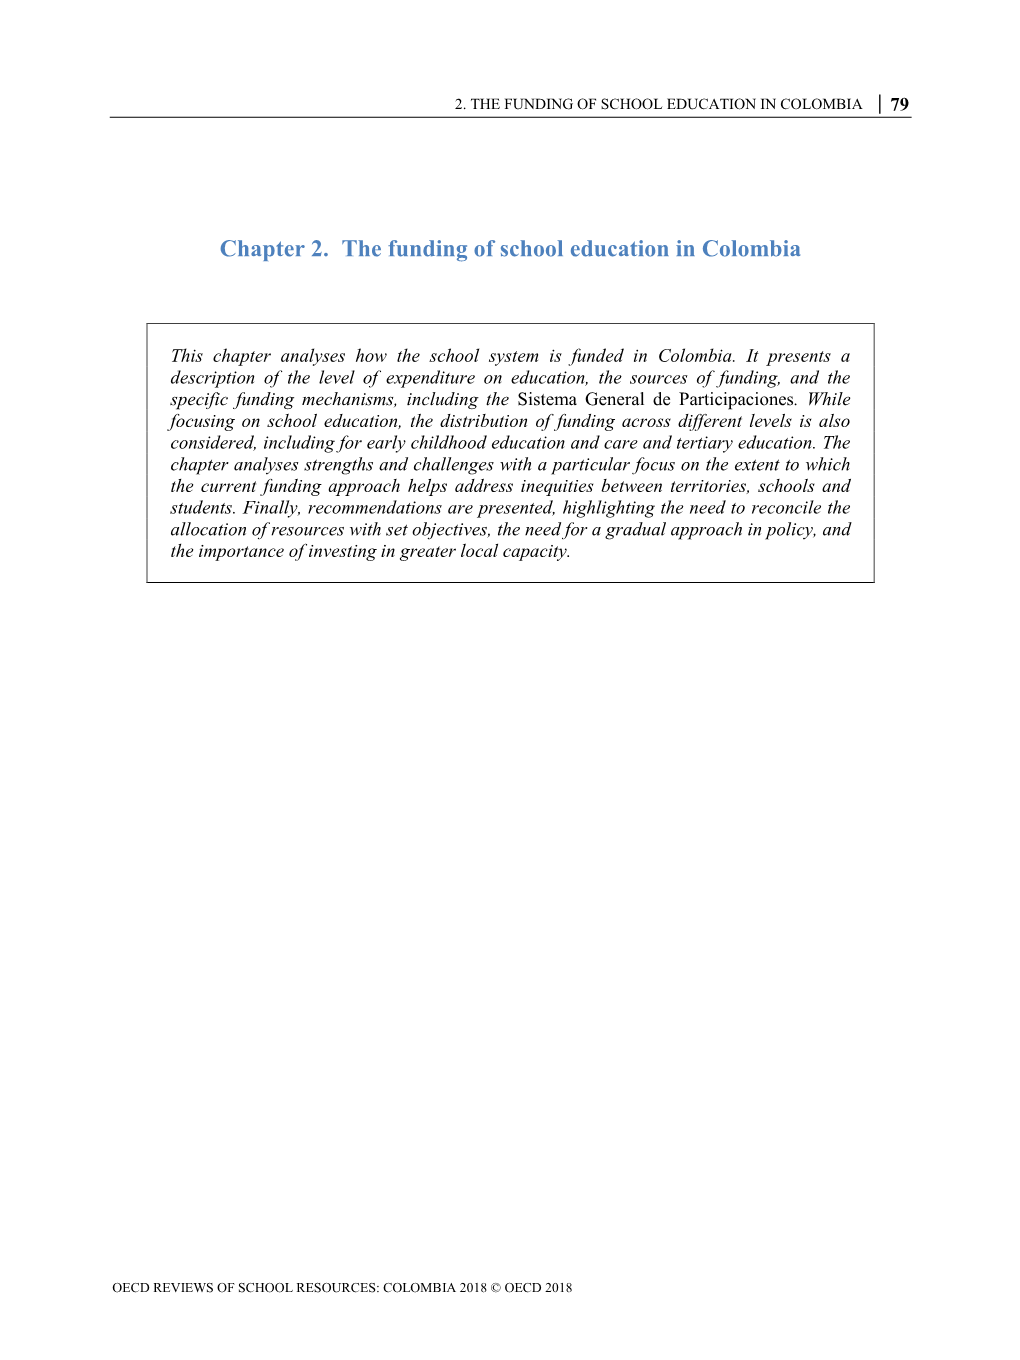 Chapter 2. the Funding of School Education in Colombia